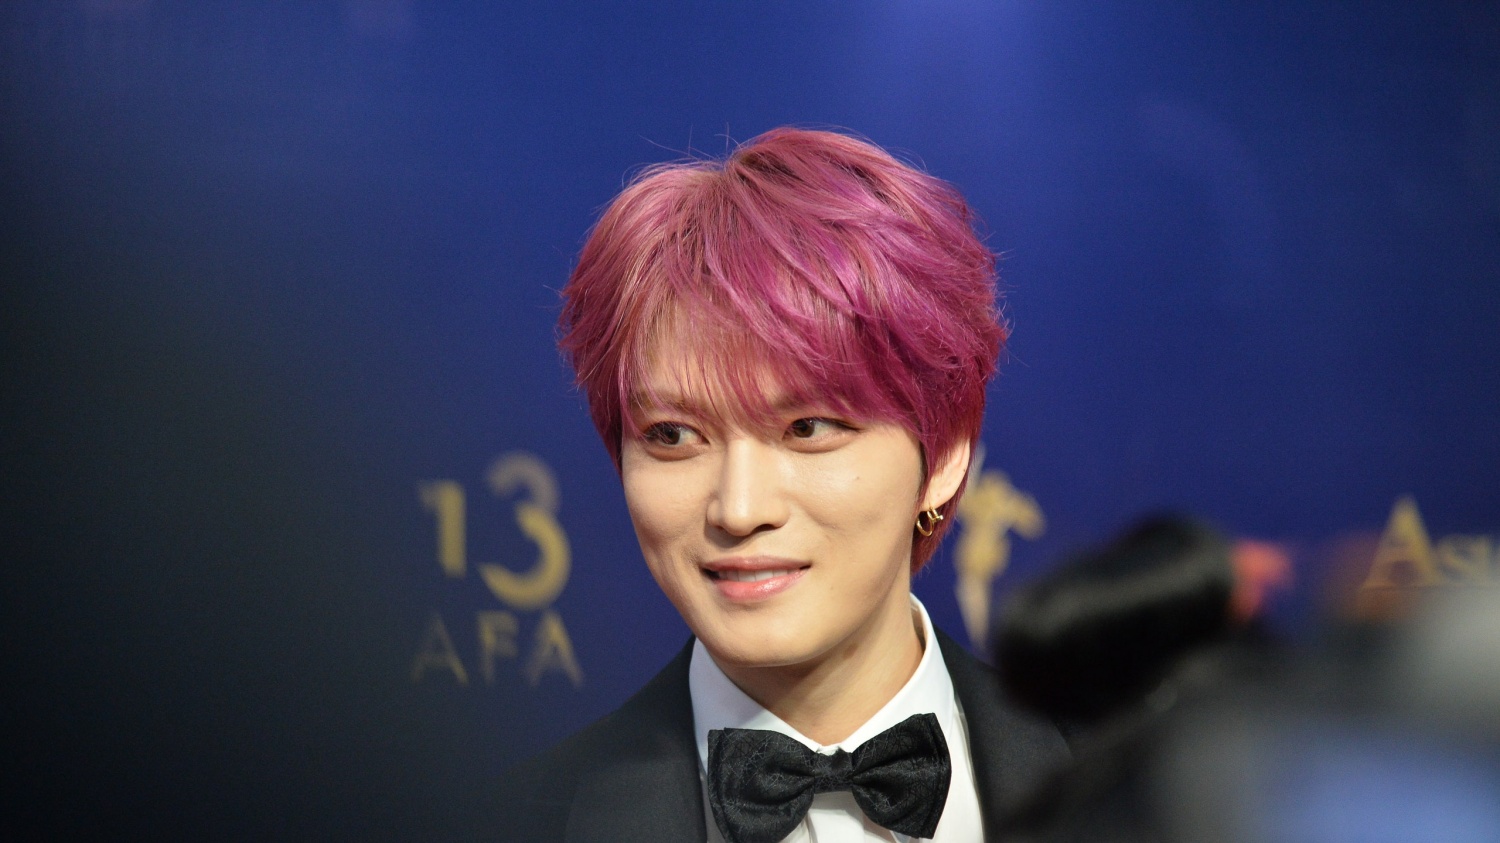 UPDATE: Kim Jaejoong Releases Letter of Apology After April Fool’s Day Coronavirus Joke